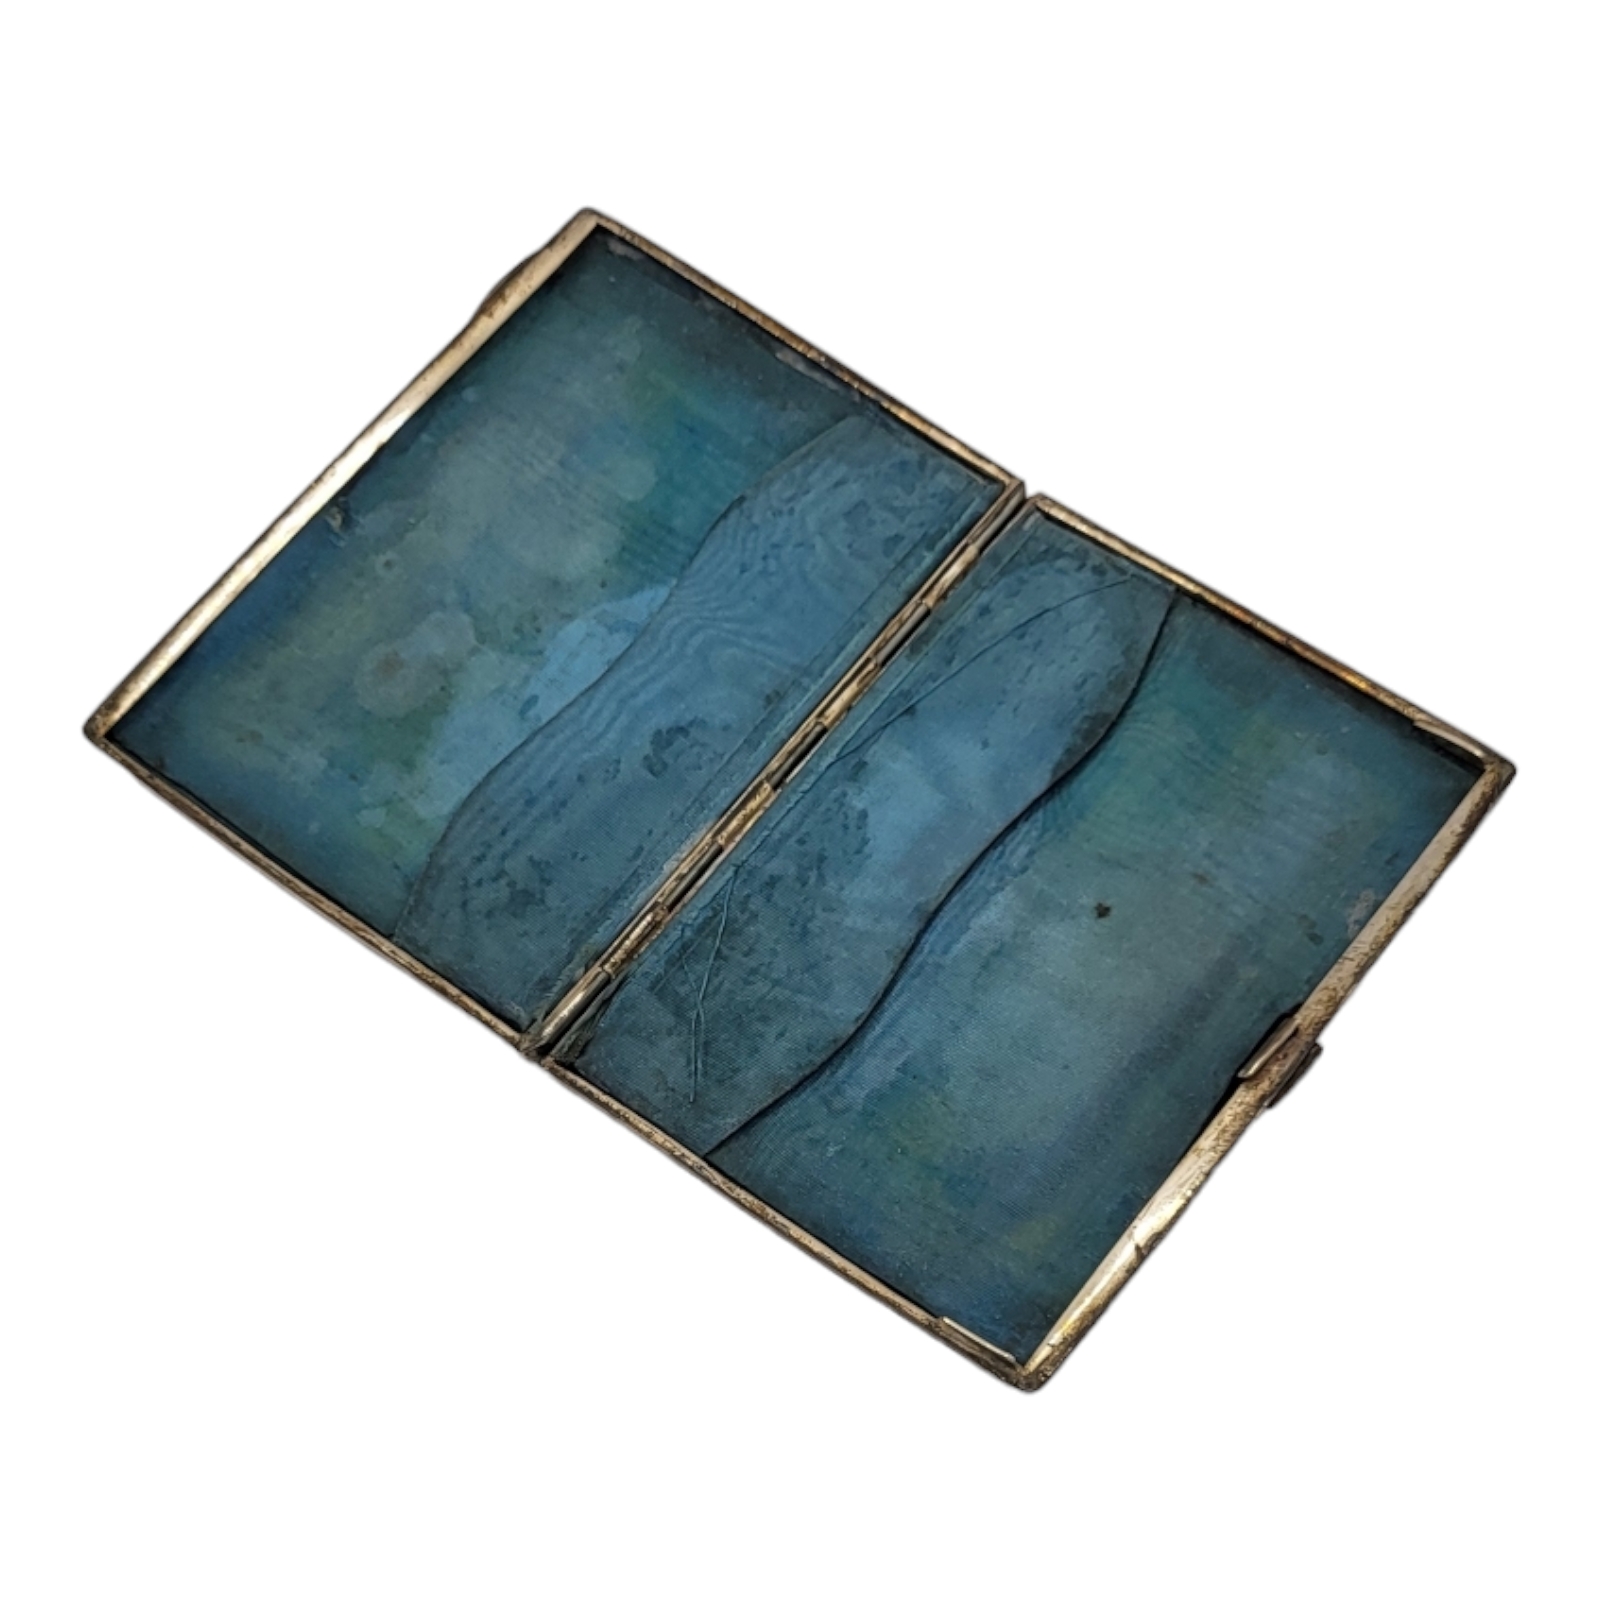 A VICTORIAN SILVER RECTANGULAR CARD CASE With engraved scrolled decoration and fitted silk interior, - Image 3 of 3